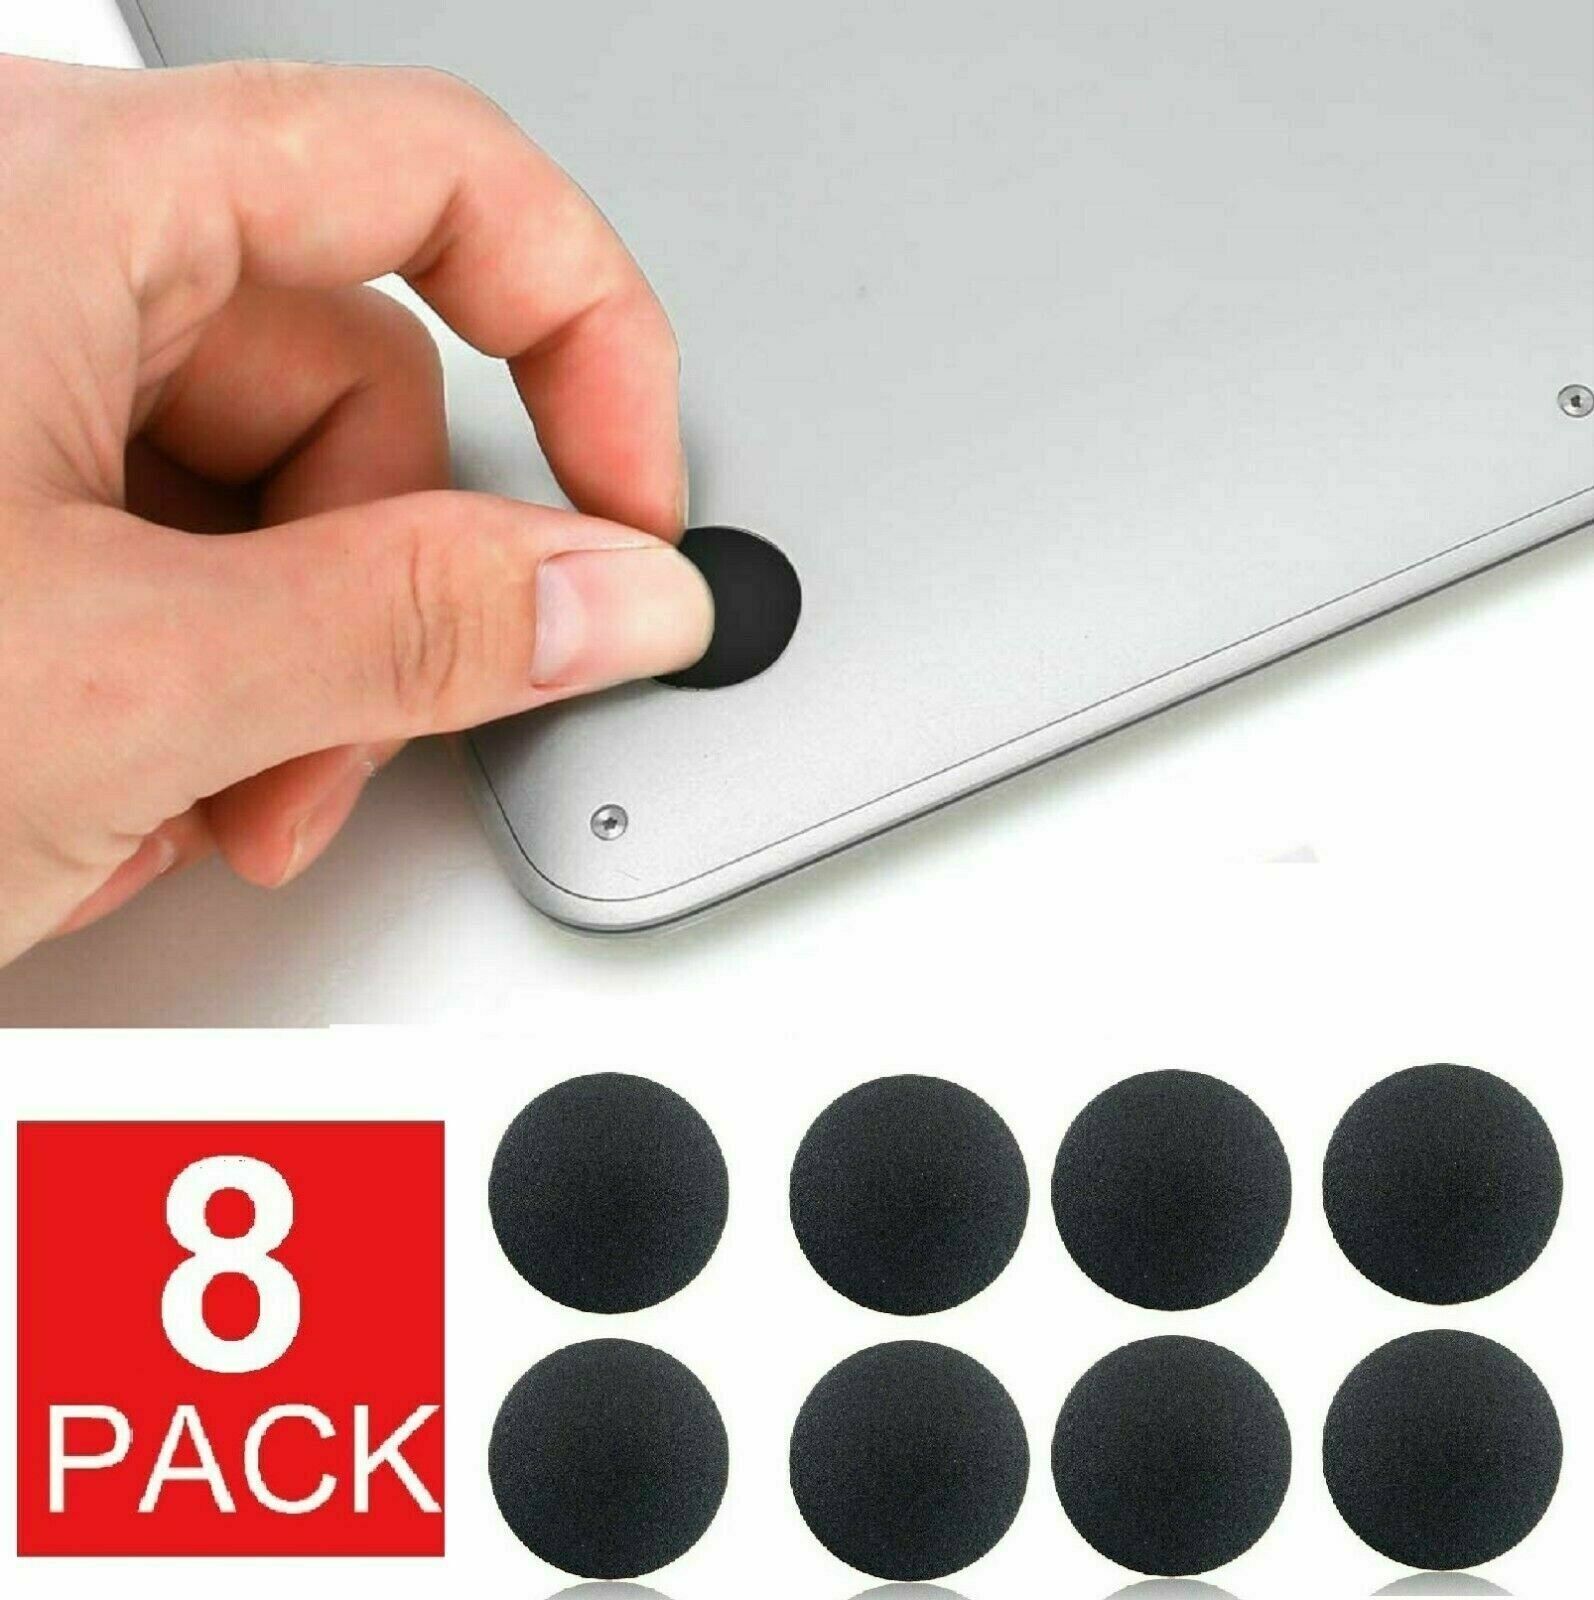 8 Pieces Rubber Case Foot Feet for Apple Macbook Macbook Pro A1425 A1502 A1398